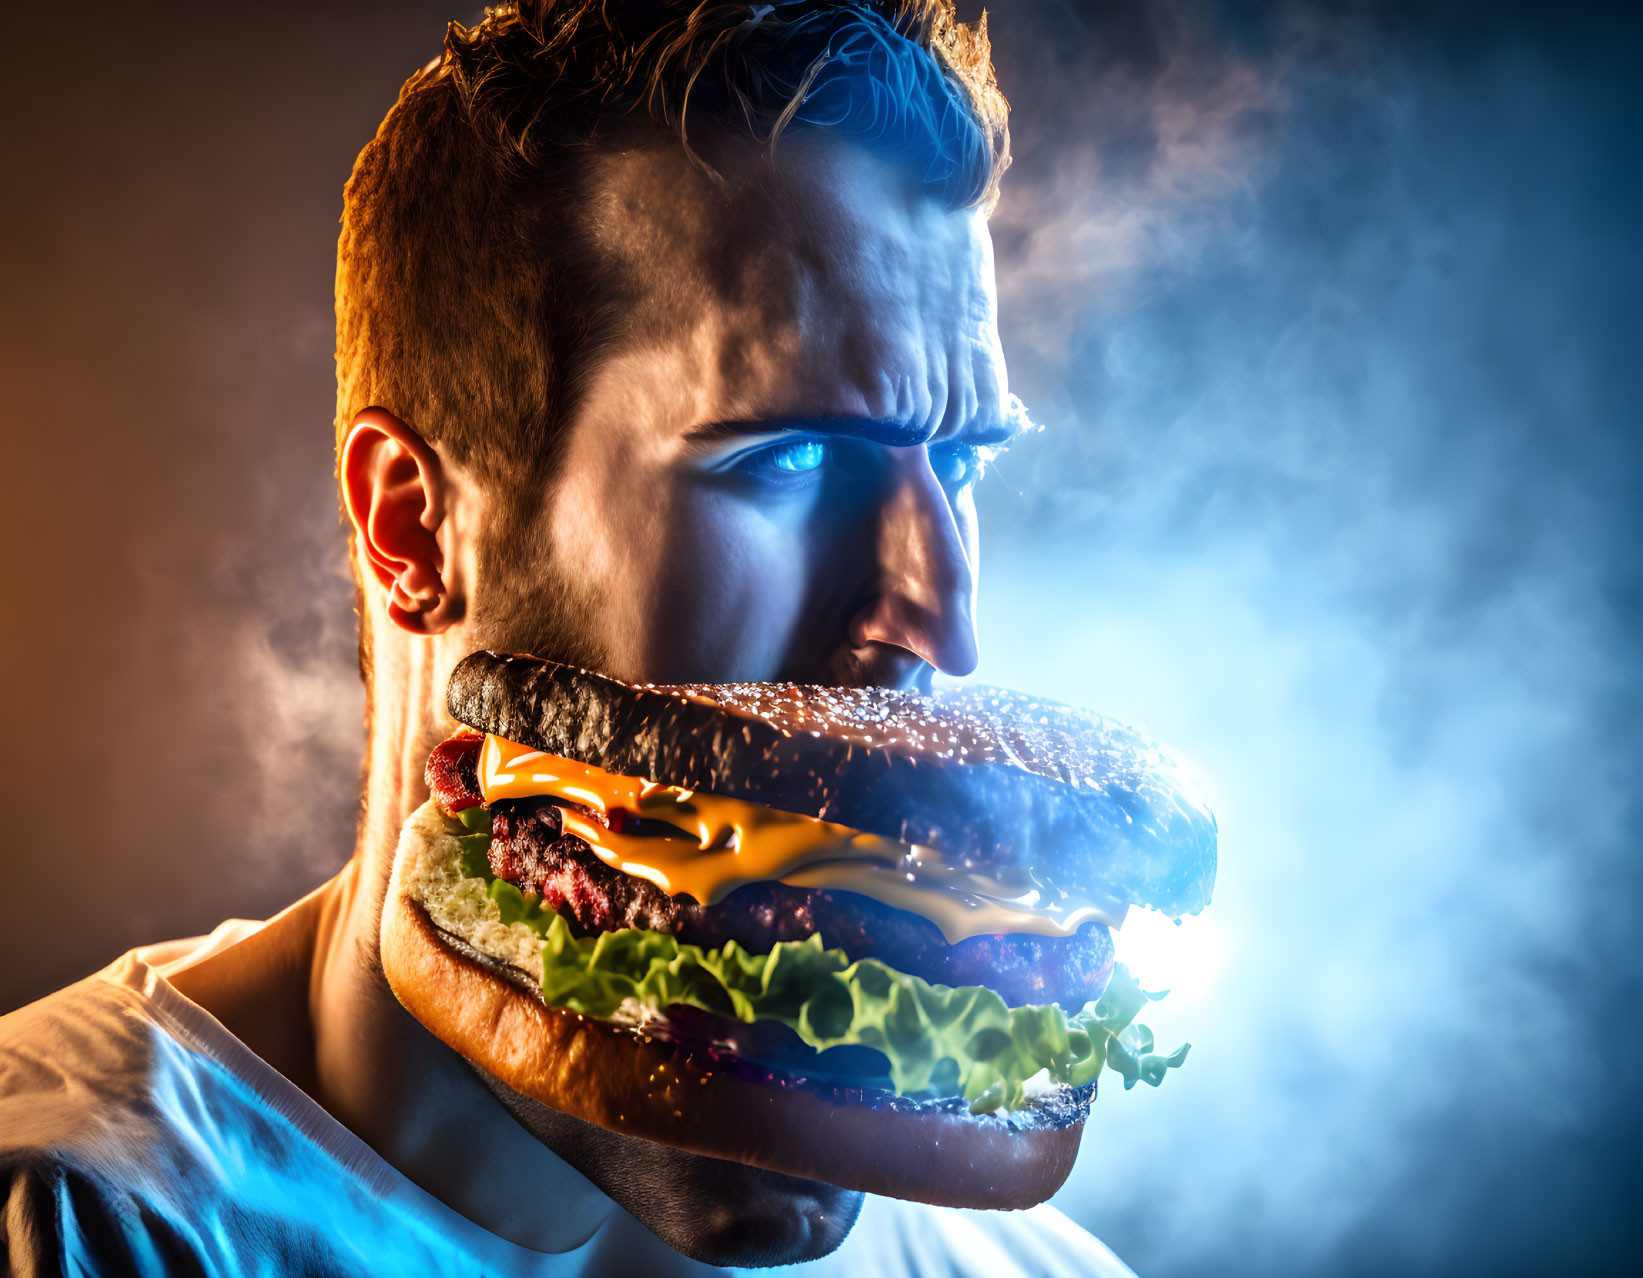 Man with wide open mouth biting into smoking cheeseburger against colorful background